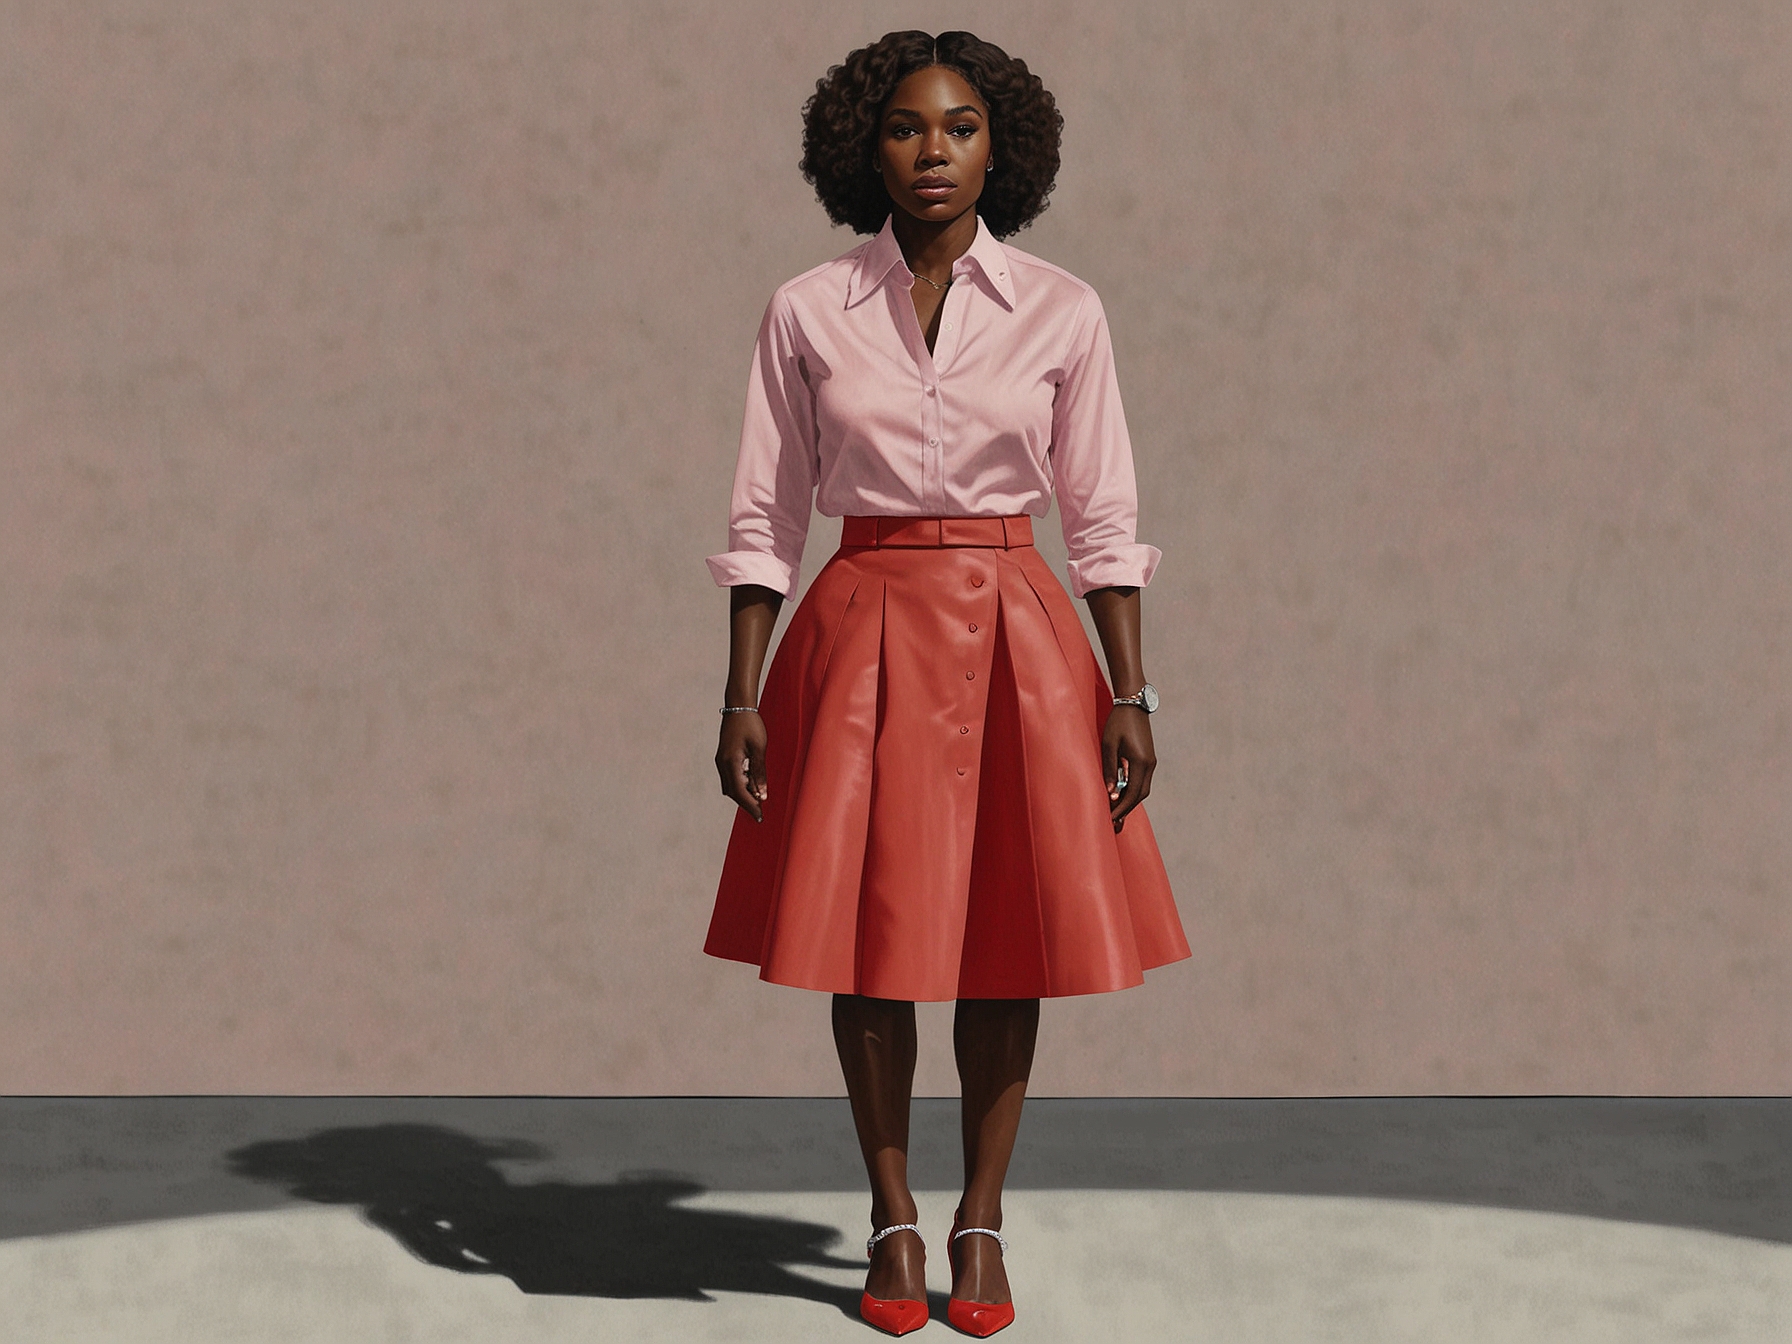 Serena Williams poses at the Thom Browne show in a pastel pink shirt tucked into a bold red skirt. Her minimalist jewelry and sophisticated heels complete this daring and fashionable look.